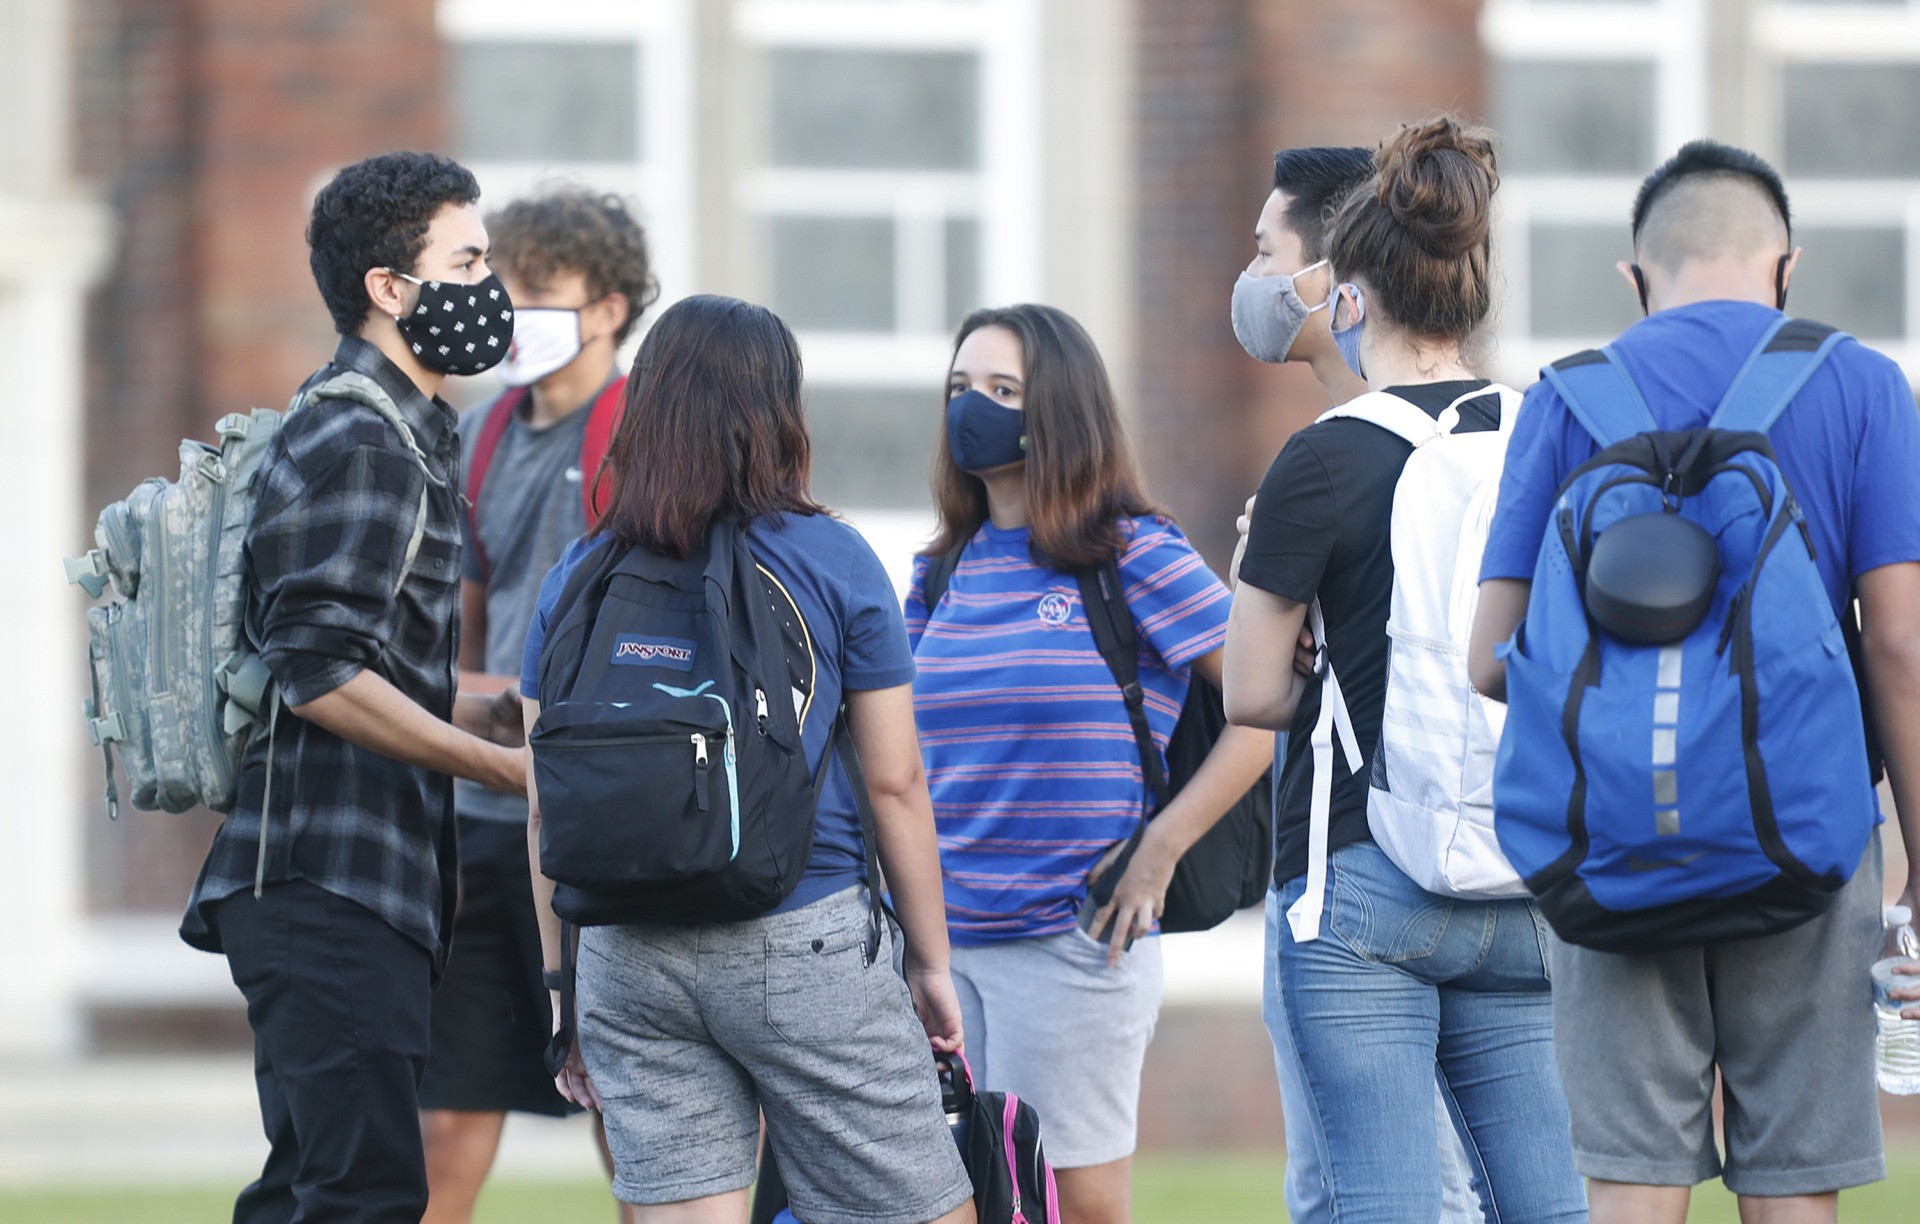 TAMPA, FL - AUGUST 31: Students at Hillsborough High School wait in line to have temperature checked before entering the building on August 31, 2020 in Tampa, Florida. The Hillsborough County Schools District gives their students the in-class learning option amid the coronavirus pandemic. (Photo by Octavio Jones/Getty Images)